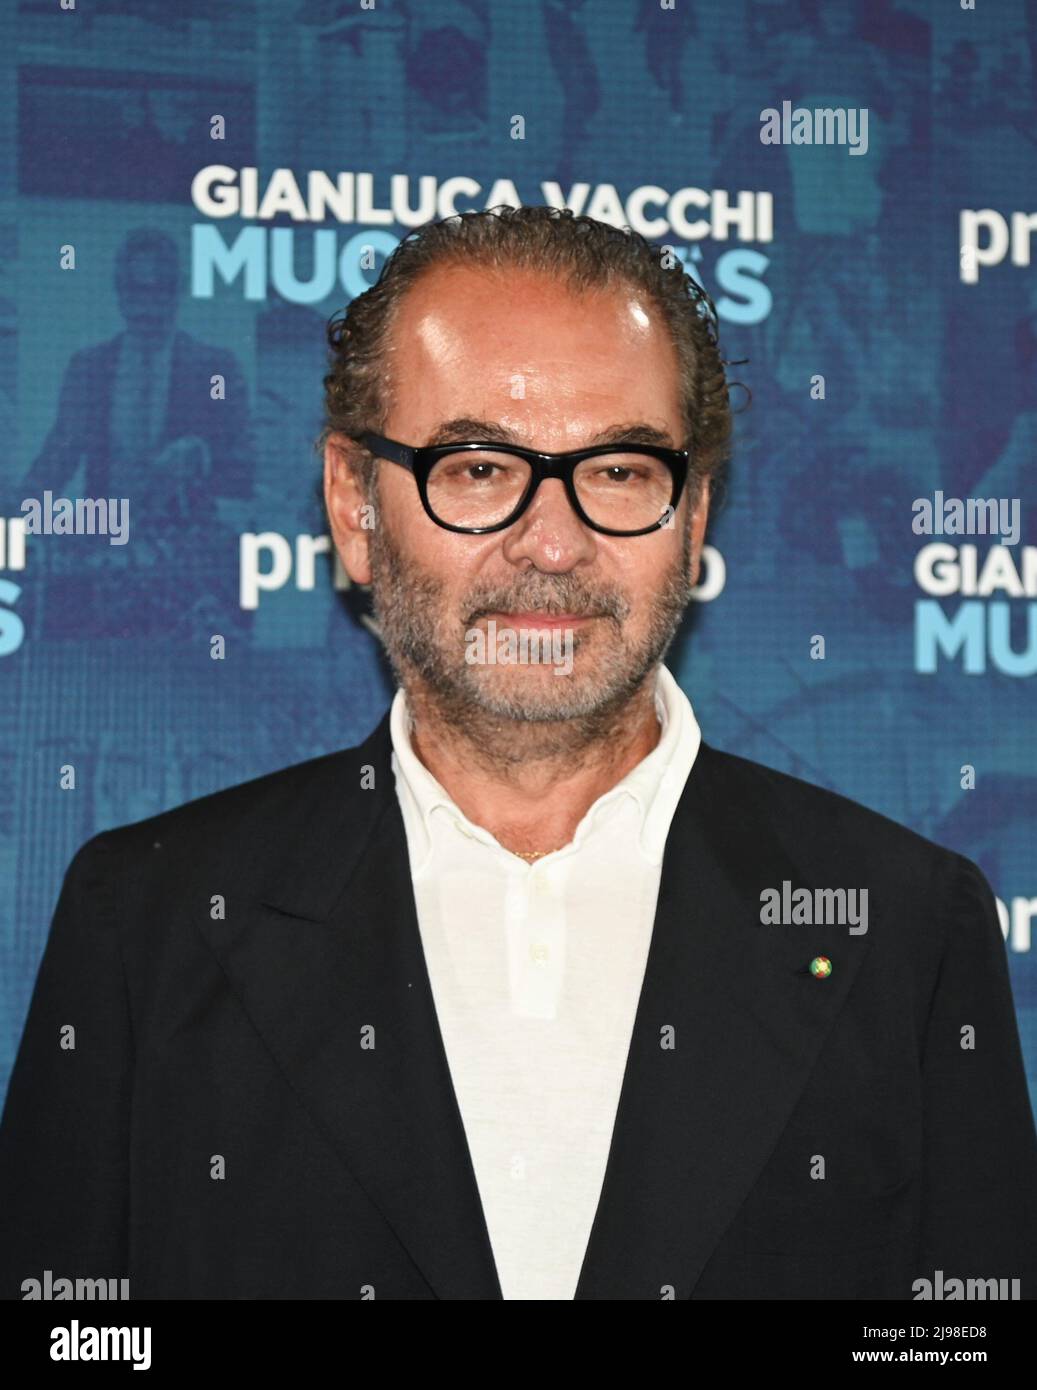 Monza, Italy. 21st May, 2022. Monza, Italy Gianluca Vacchi photocall at  Villa Reale presentation of the documentary Mucho Mas on Prime Video In the  photo: Gianluca Vacchi, Sharon Fonseca and their daughter